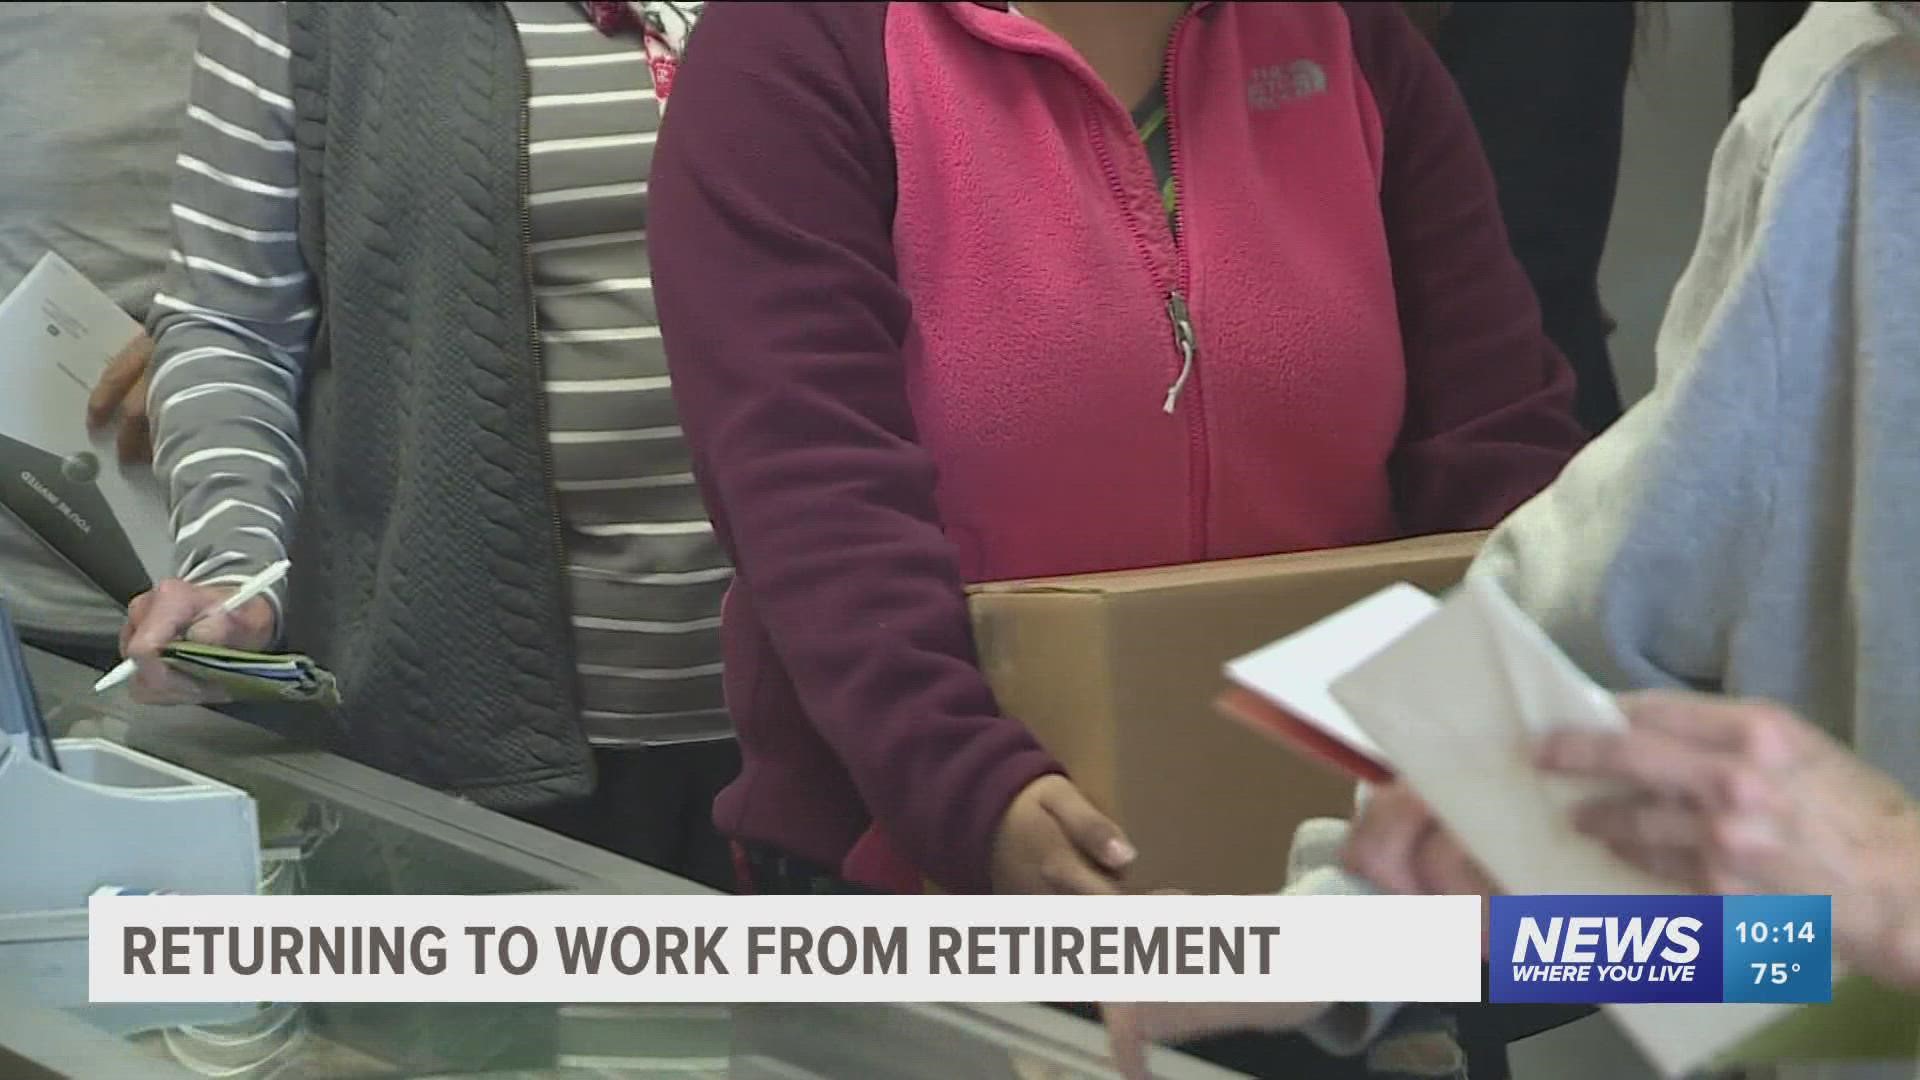 During the height of the pandemic, more than 3 million people in the U.S. retired. Now, a majority of those are returning to work to make ends meet.